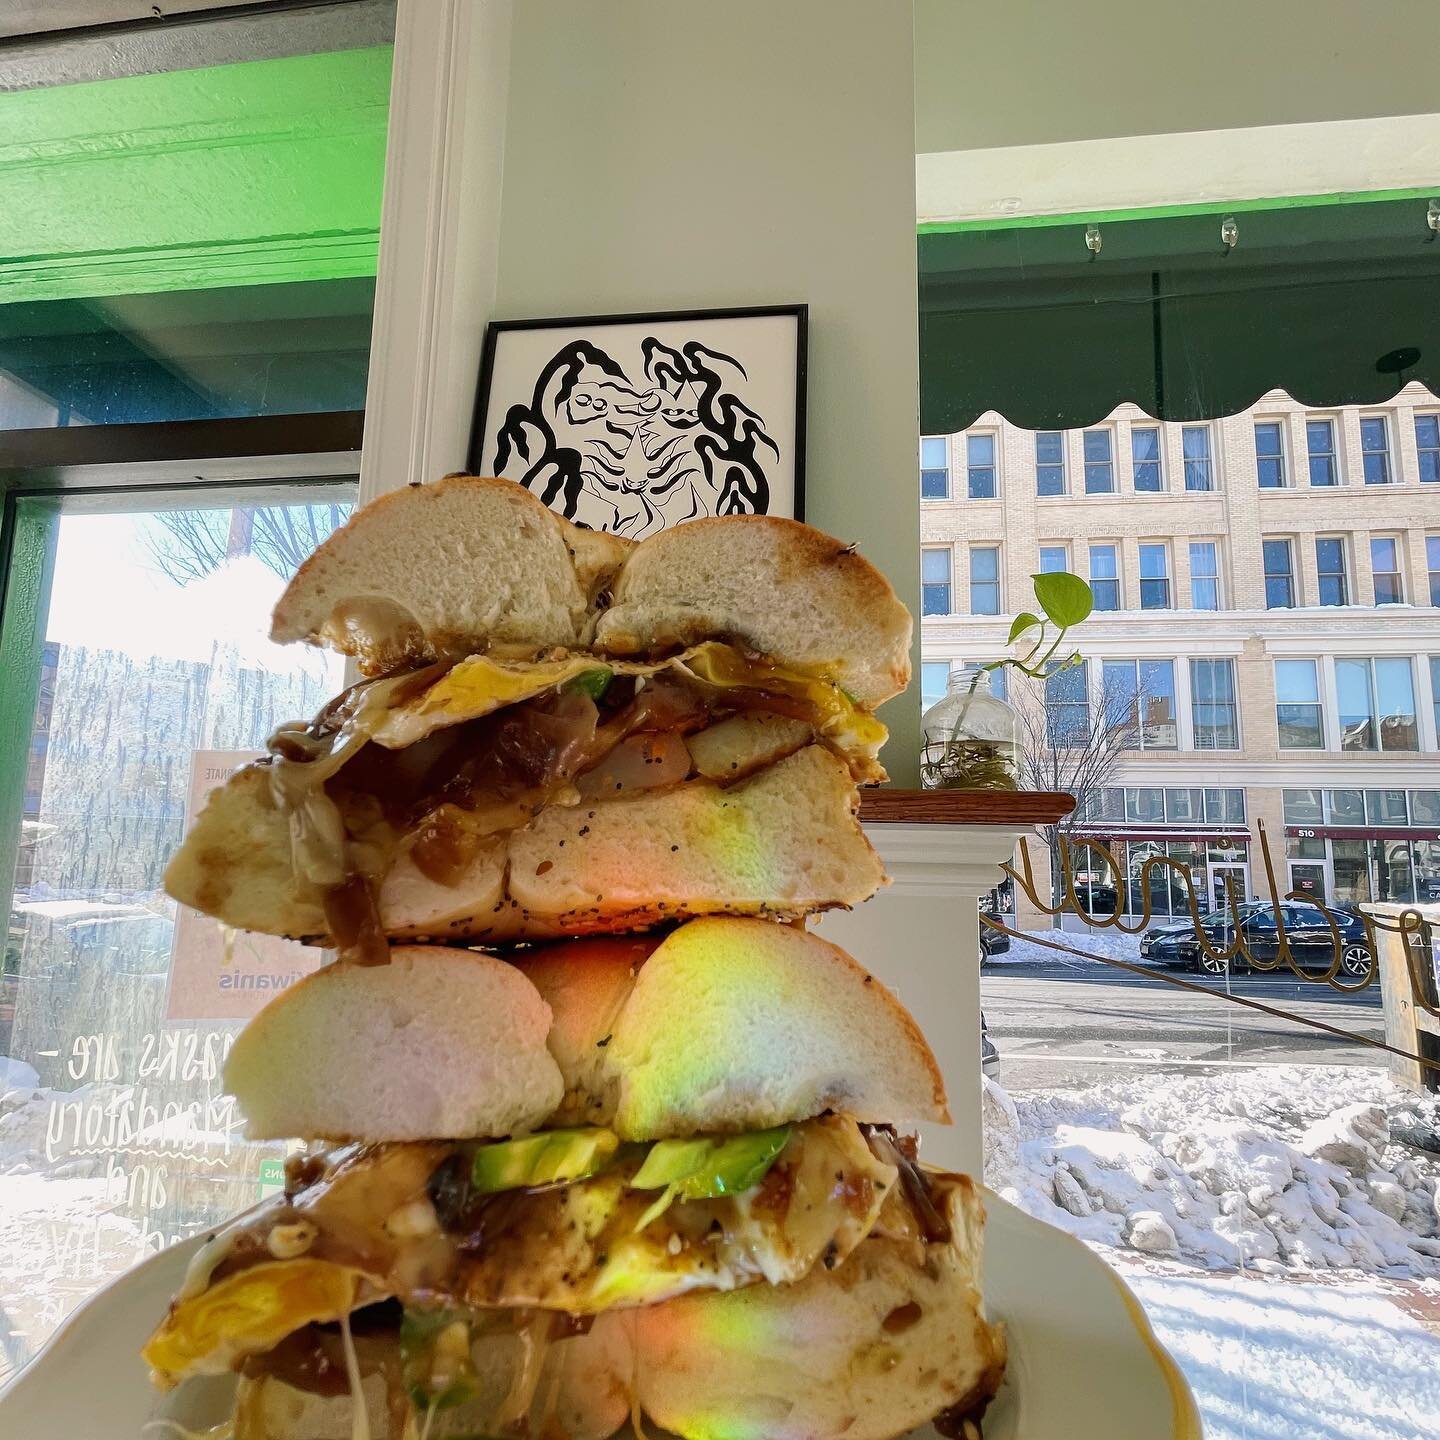 Teriyaki mushroom fontina egg n cheese with crispy home fries and fresh jalapeño on a miso buttered everything bagel 😵&bull; a supreme post super bowl belly buster that is sure to counteract those beer/meat sweats. Brought to you by our very own bu